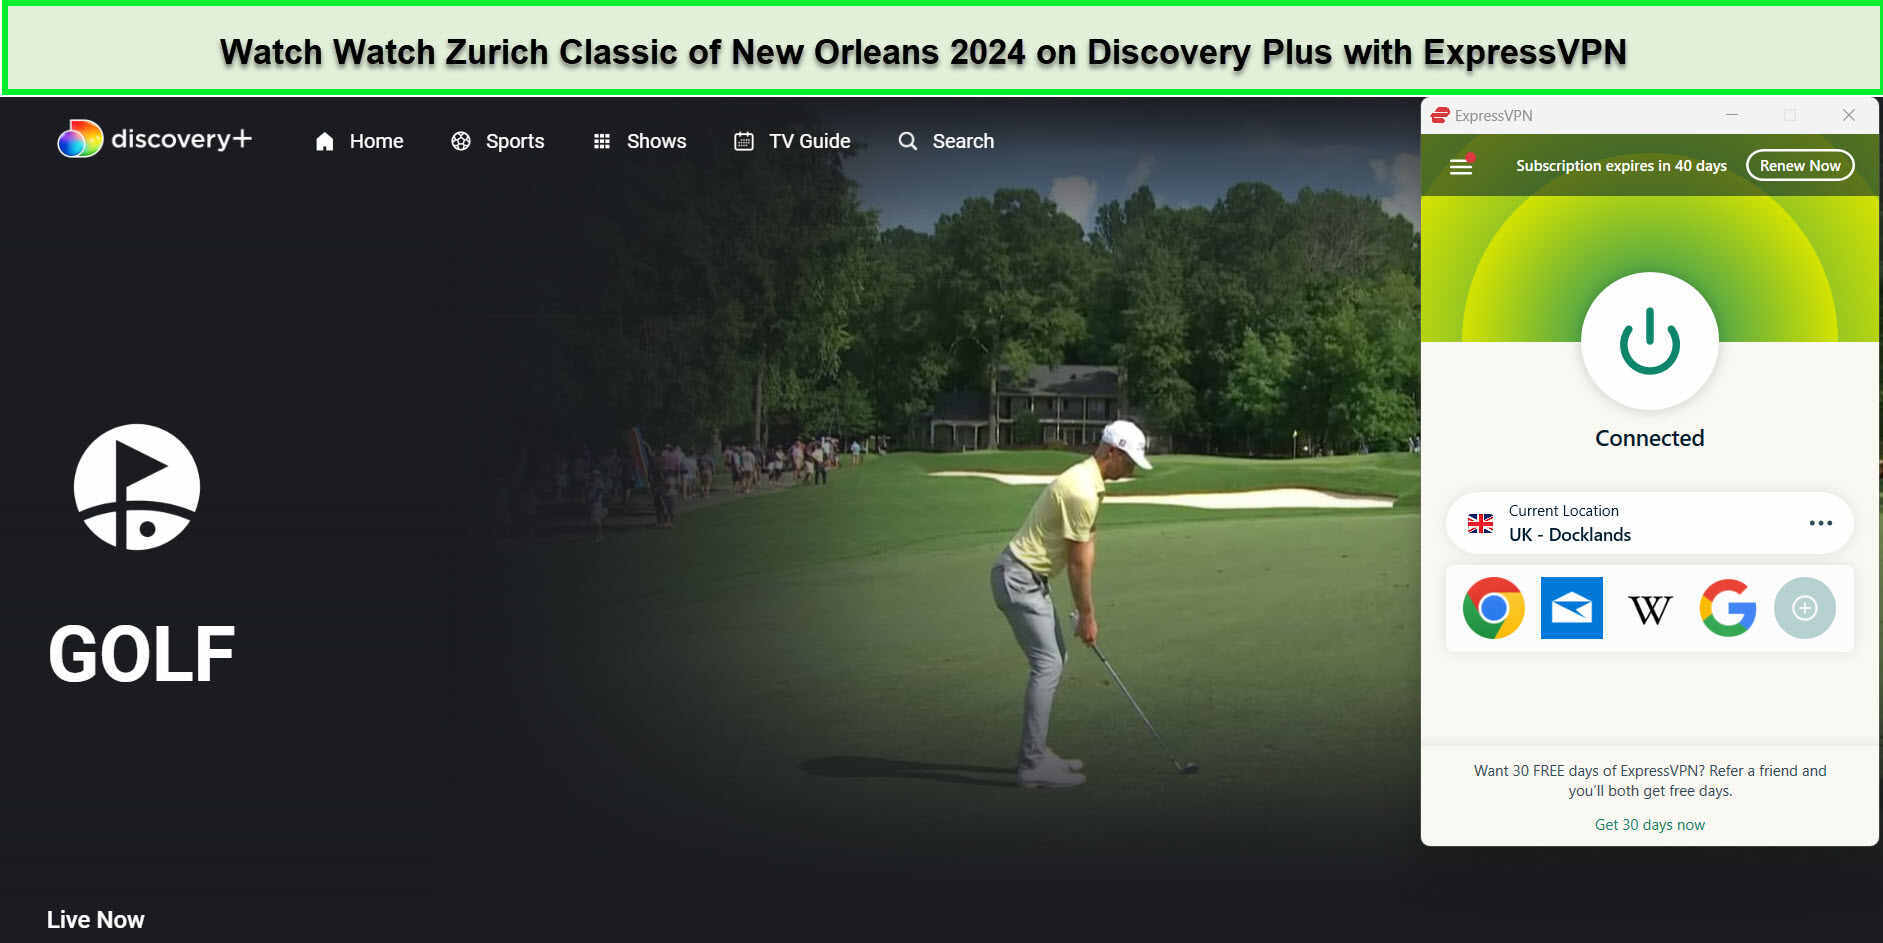 Watch-Zurich-Classic-of-New-Orleans-2024-in-South Korea-On-Discovery-Plus-with-ExpressVPN